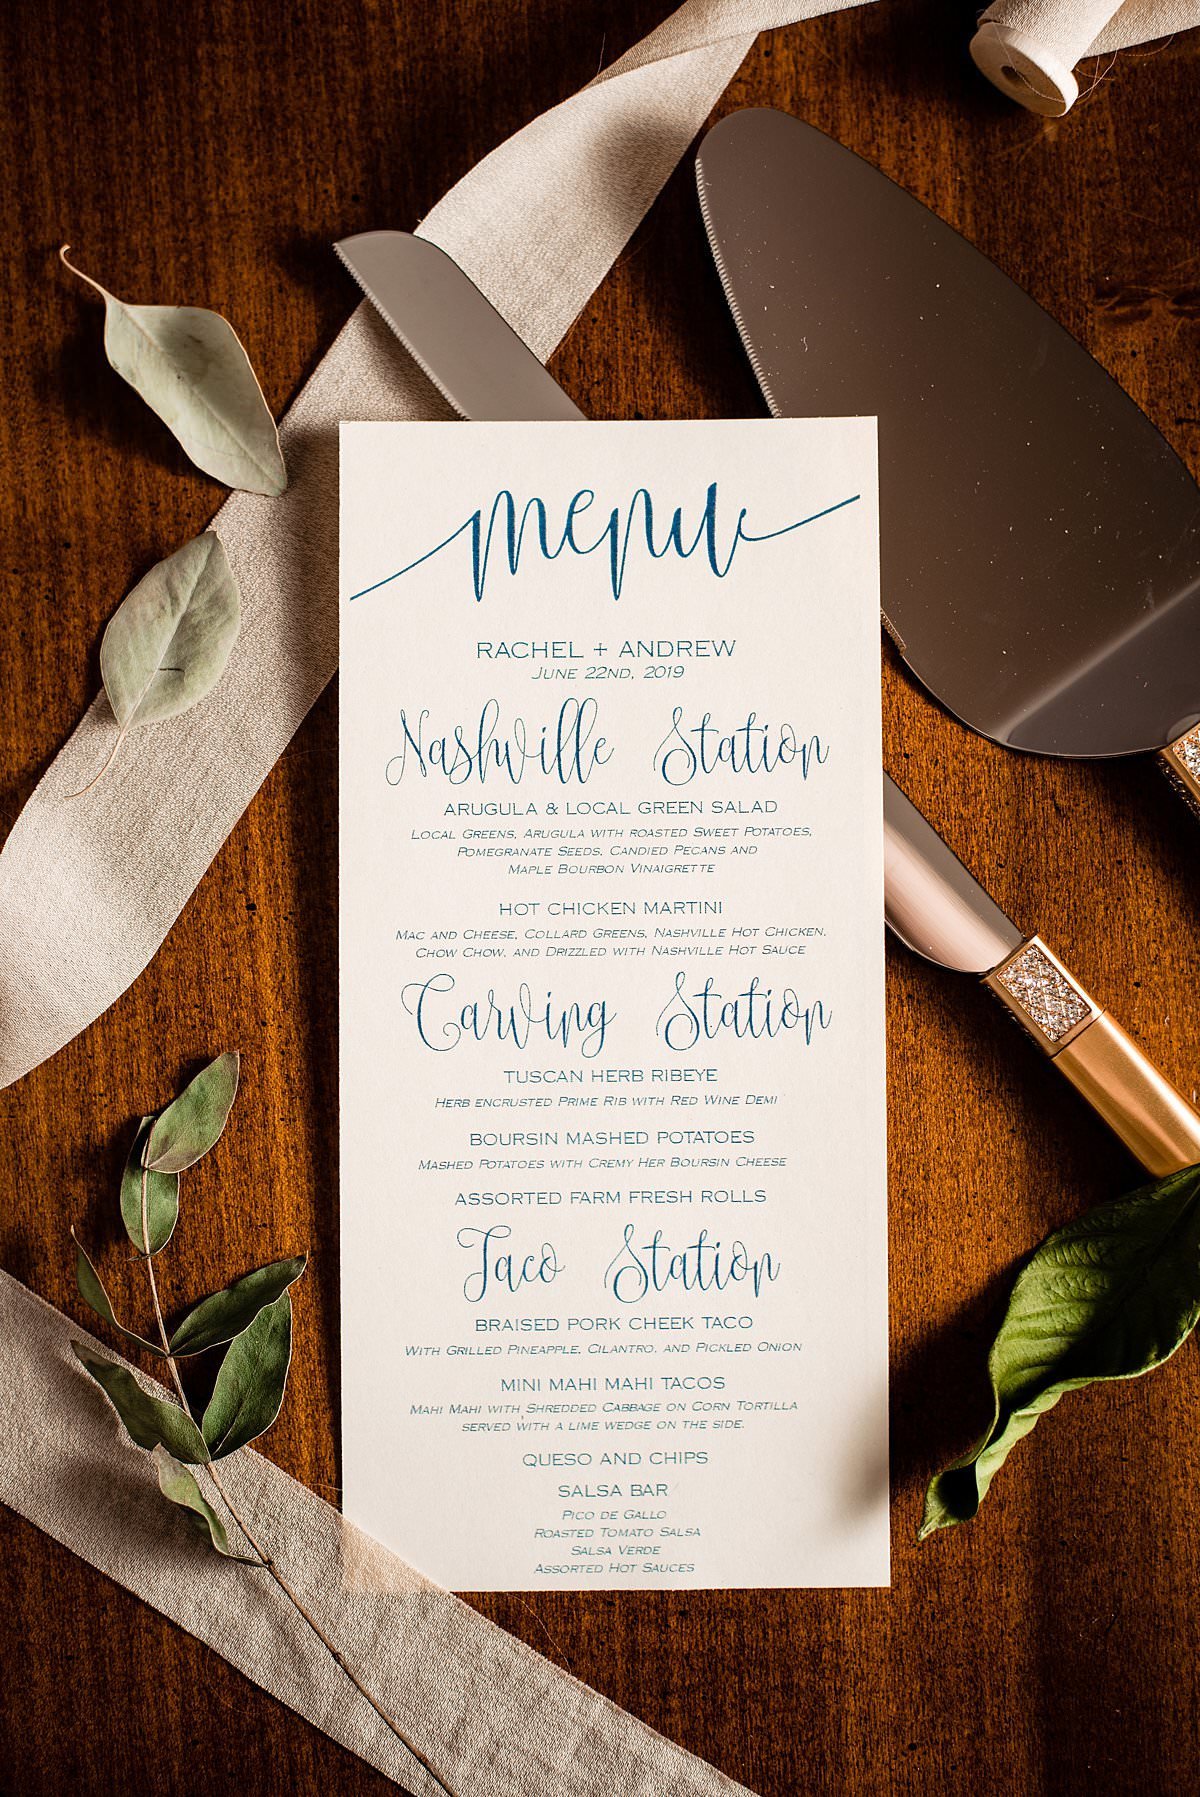 Reception Menu stationary with cake cutting tools